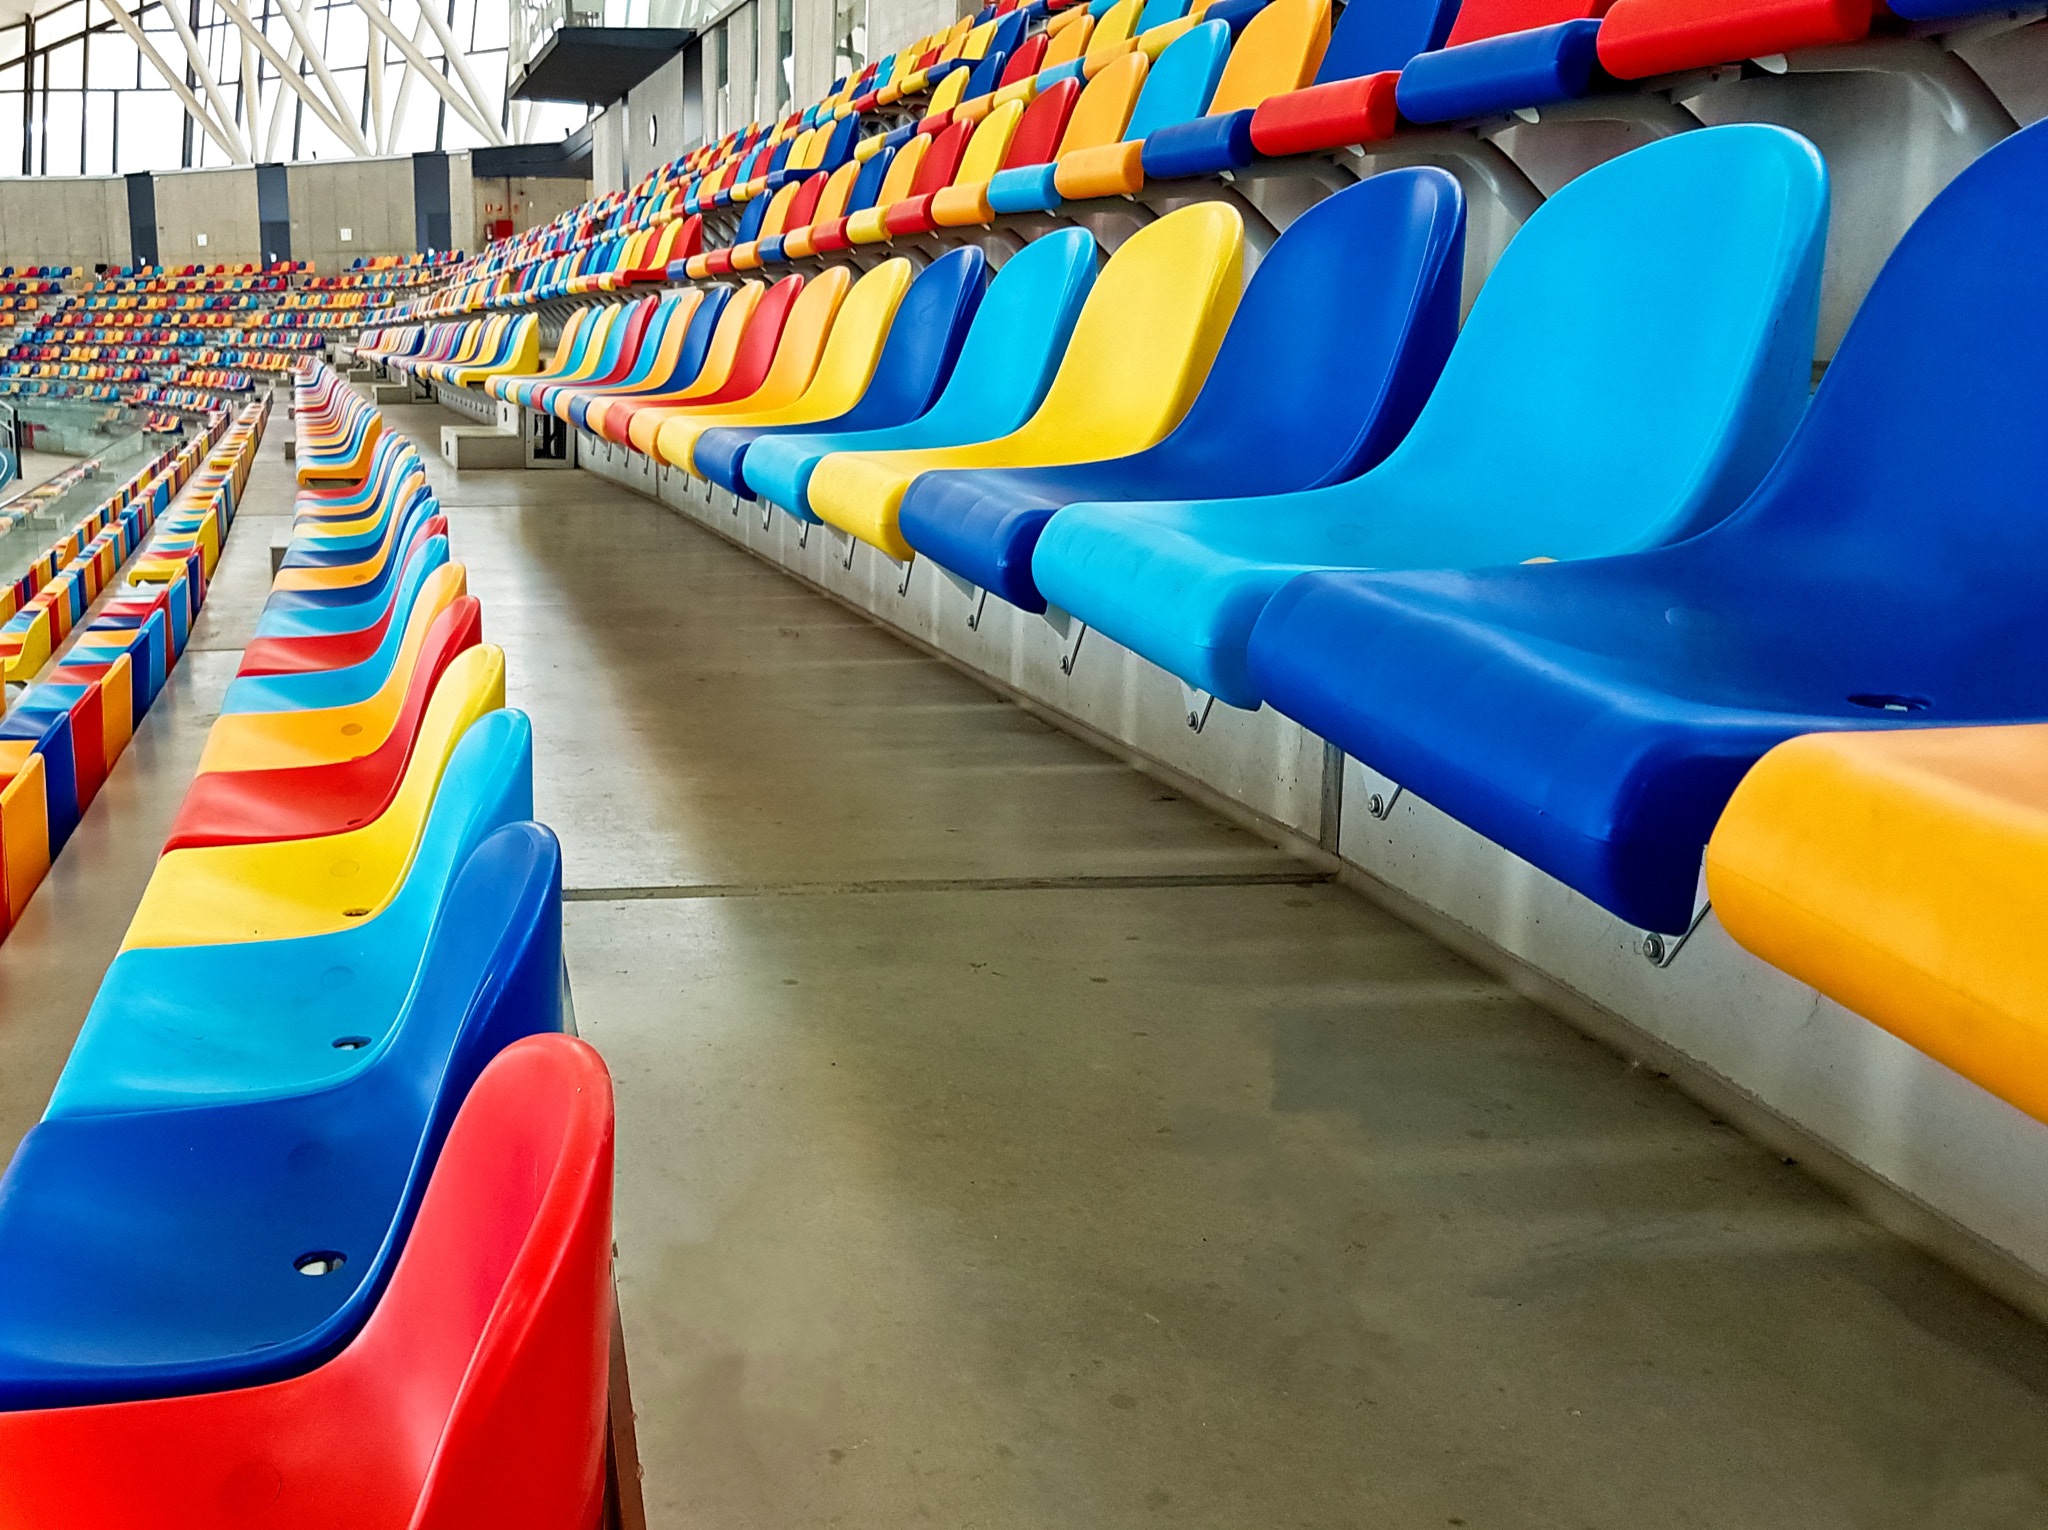 Colorful benches in a stadium